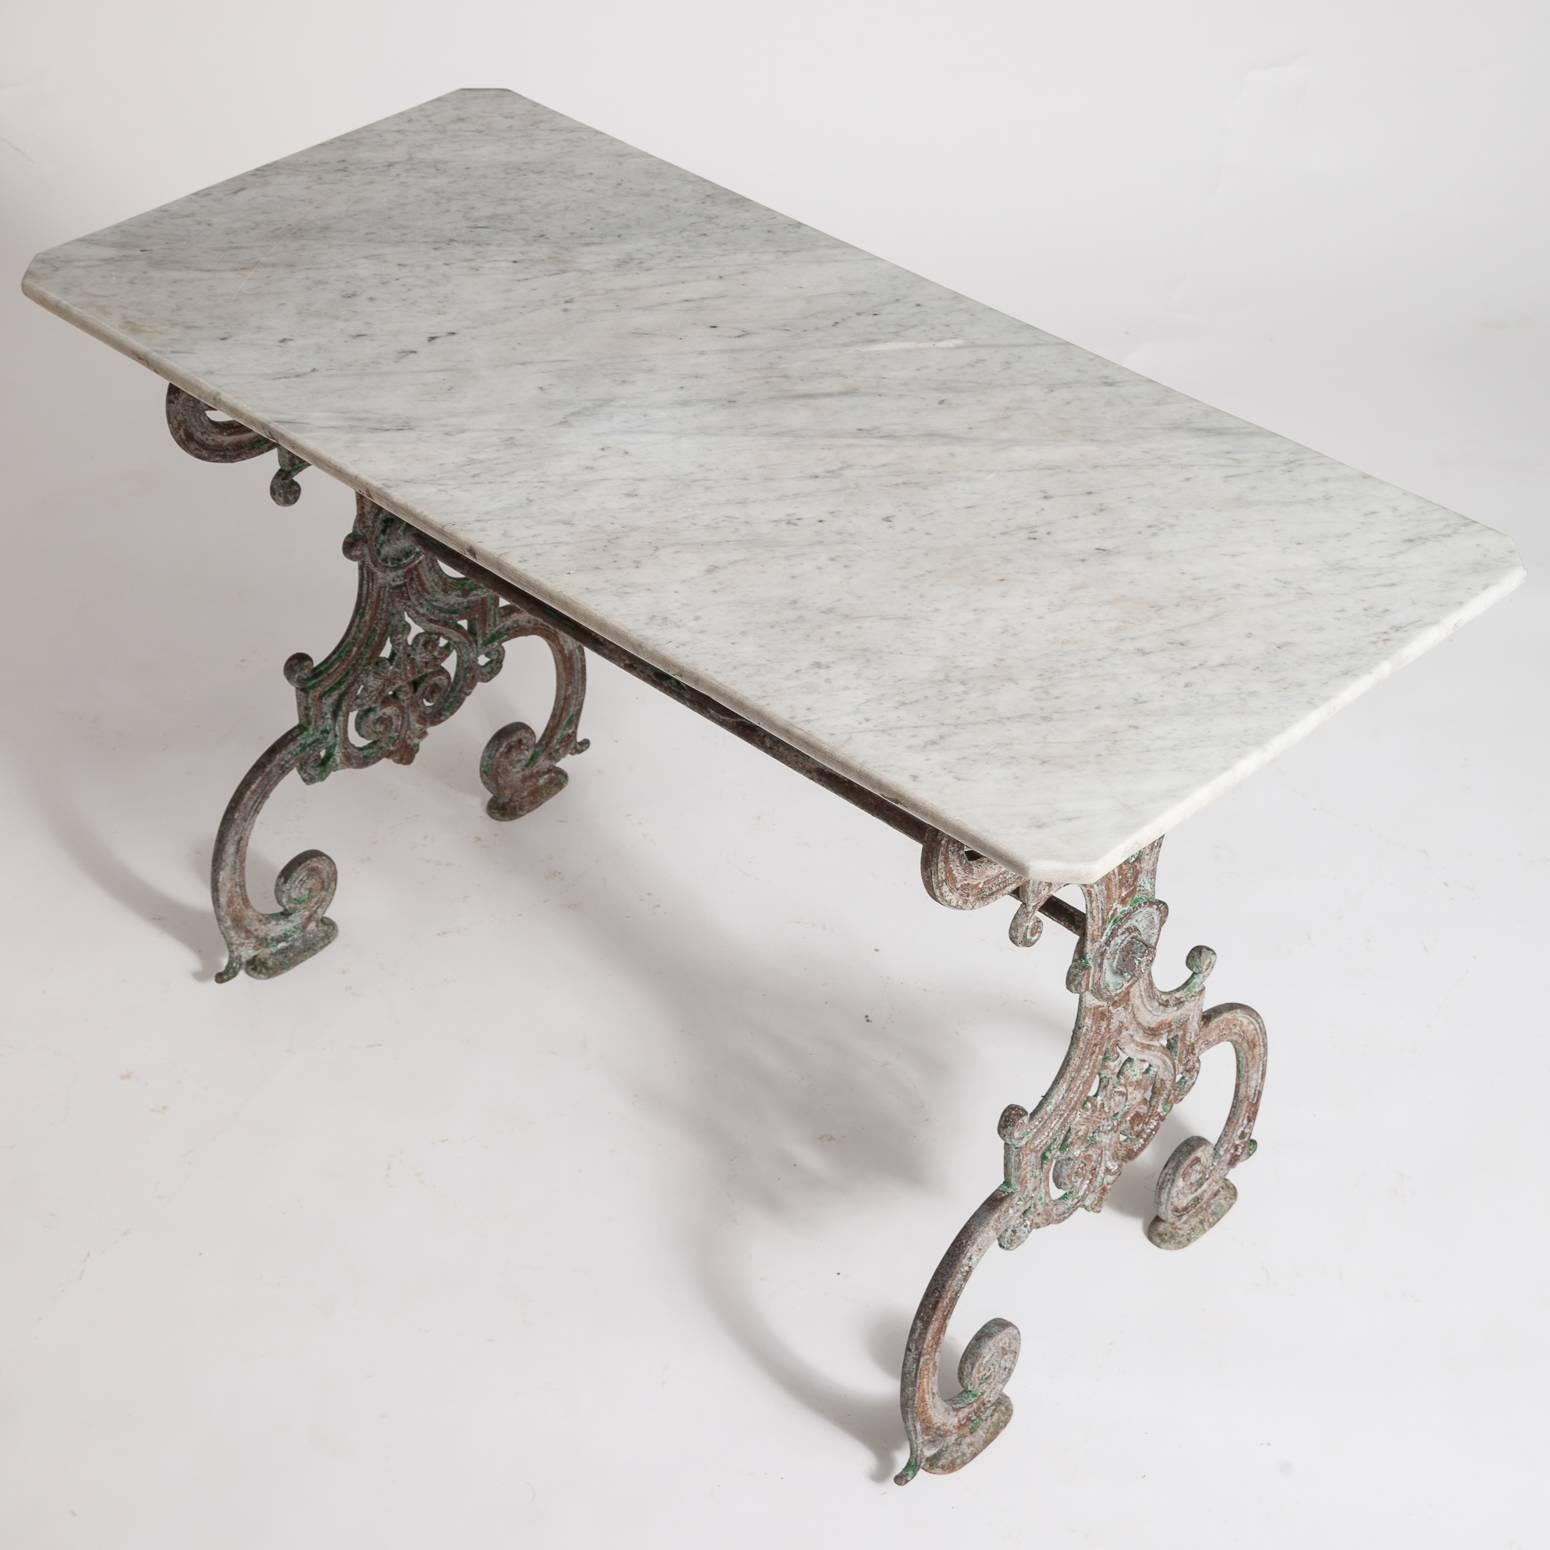 This table from the Napoleon III period has a very elaborate scrolled base that shows traces of old red and green paint and an old marble top in great condition with squared off corners.